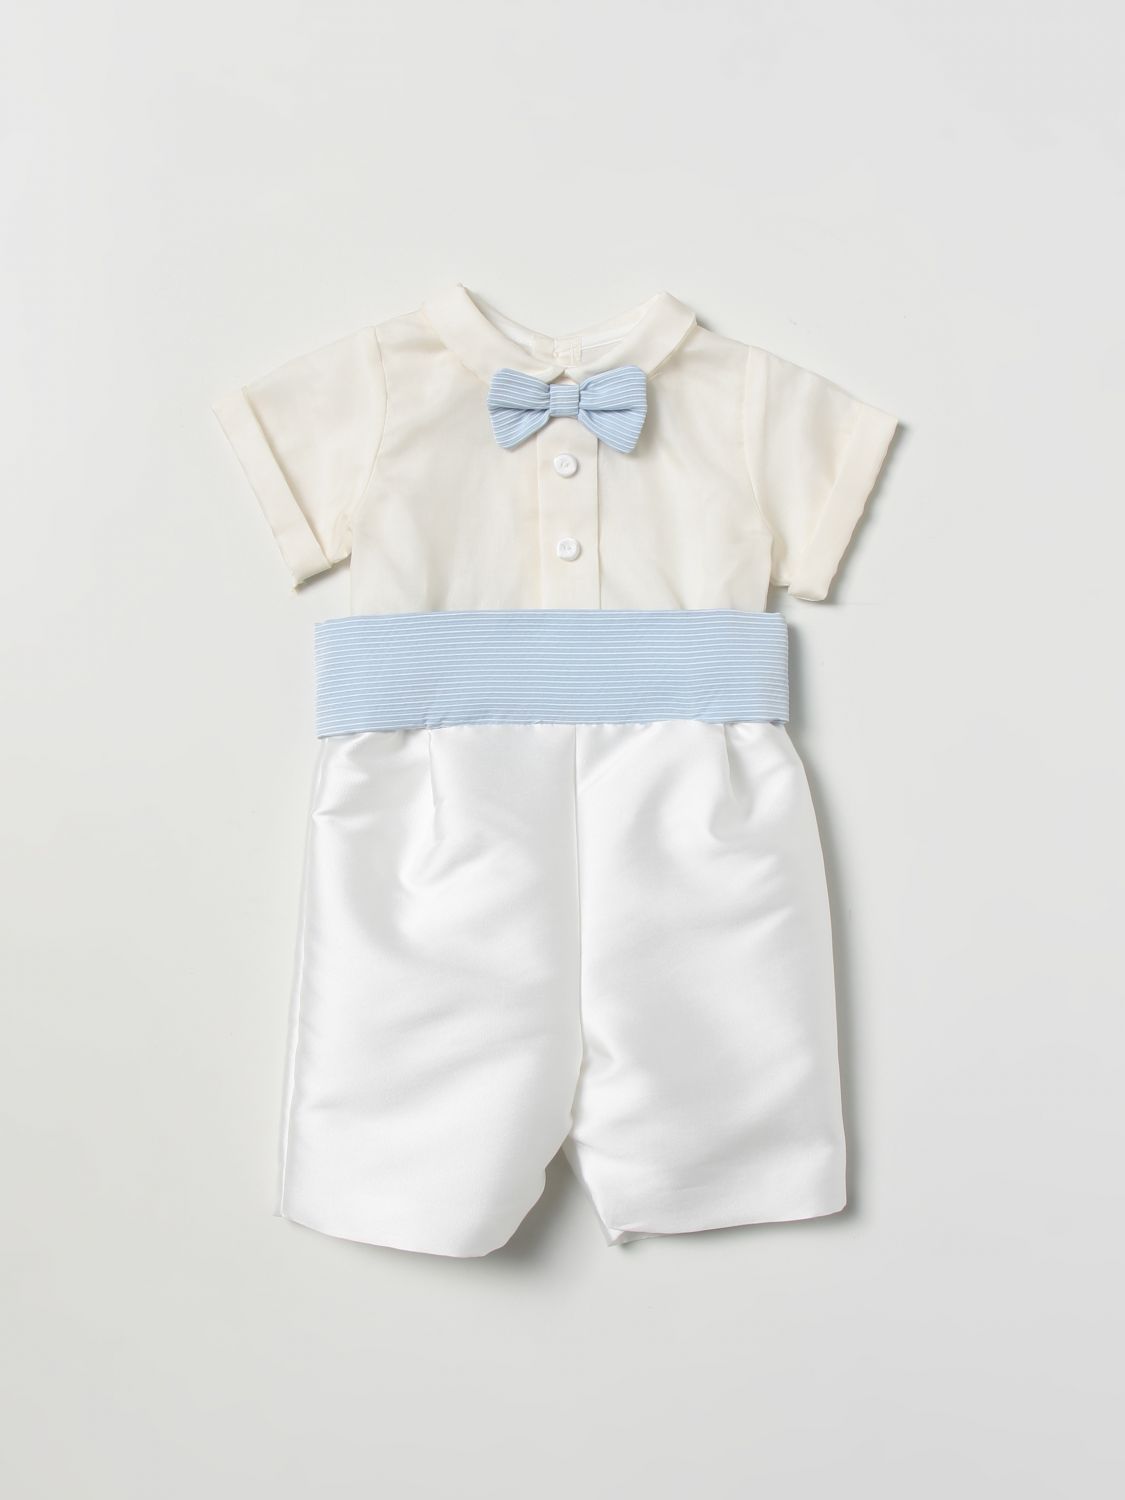 La Stupenderia Babies' Overall  Kinder Farbe Weiss In White